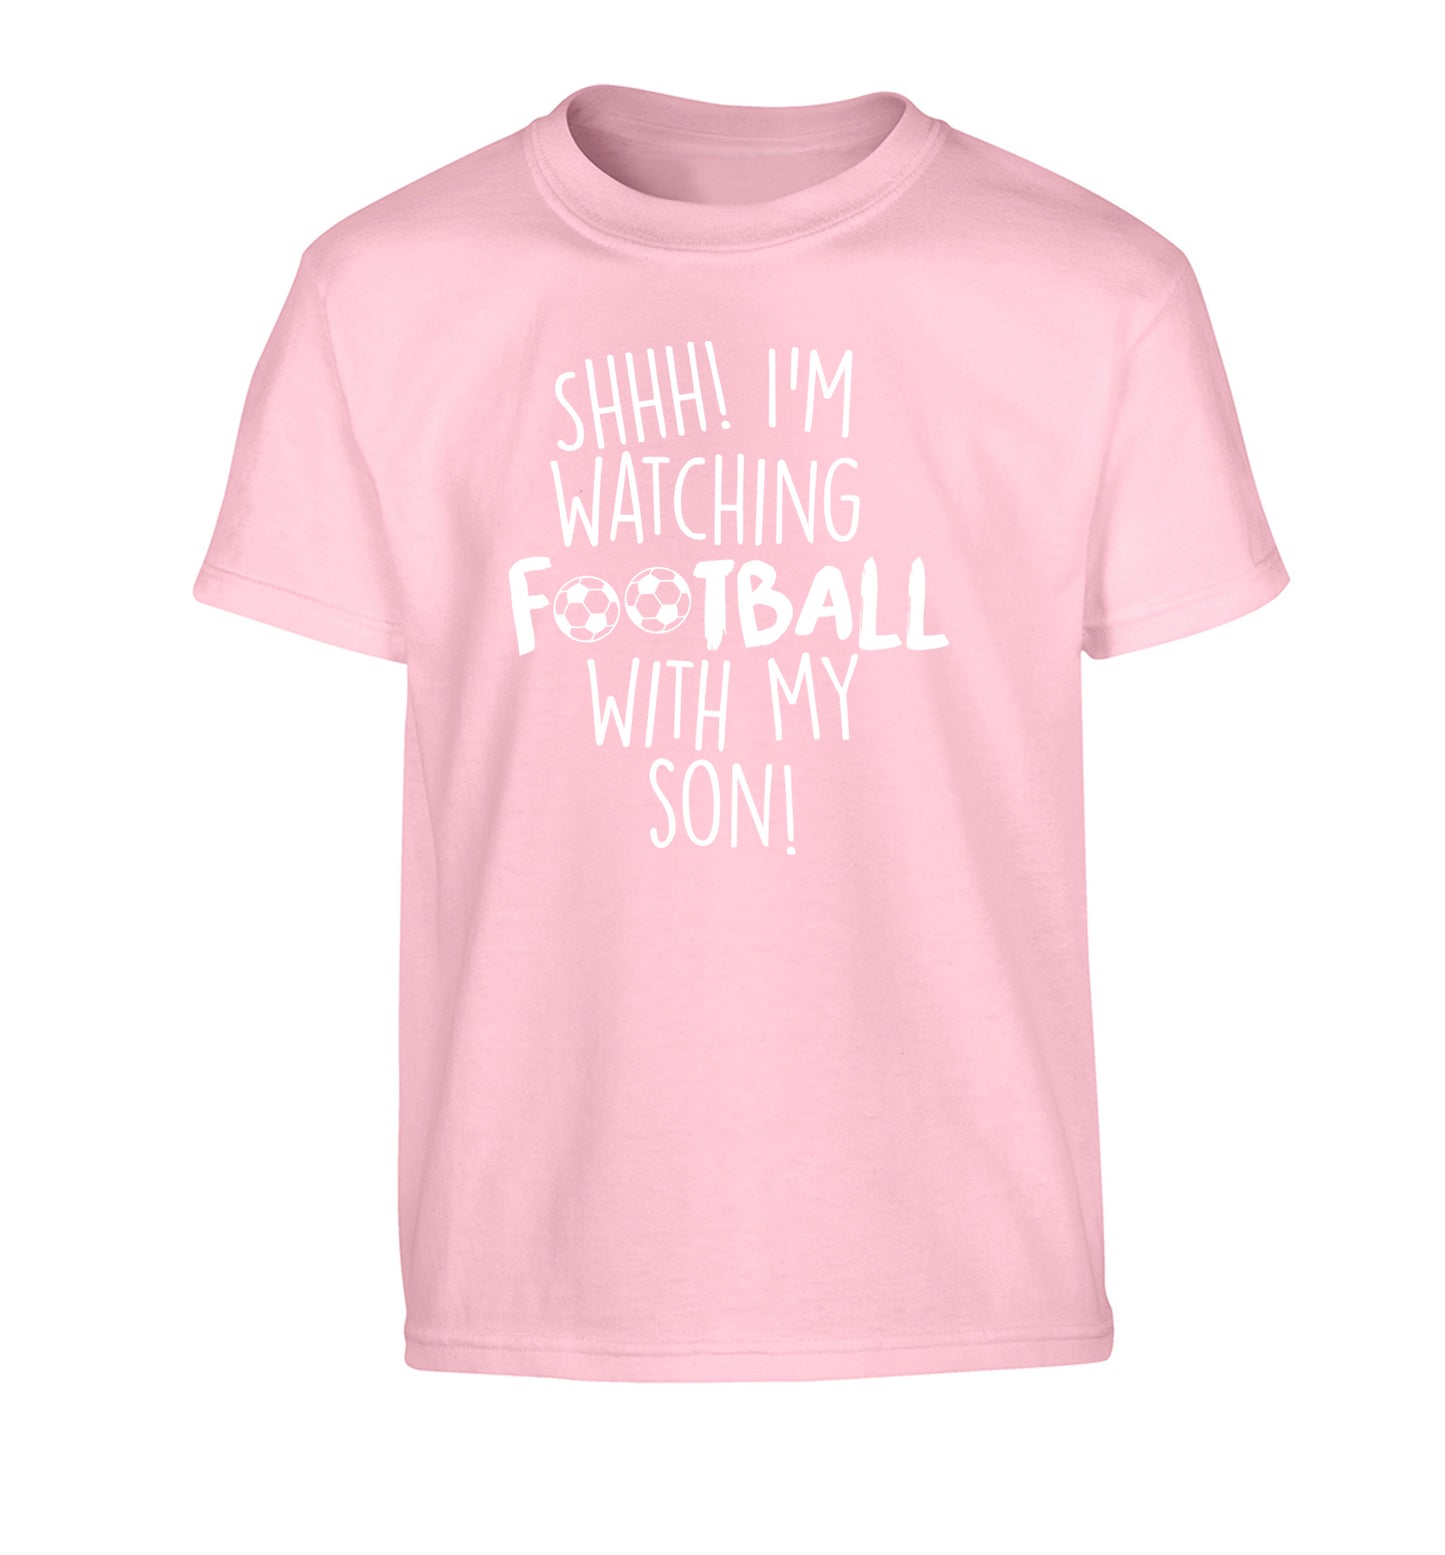 Shhh I'm watching football with my son Children's light pink Tshirt 12-14 Years